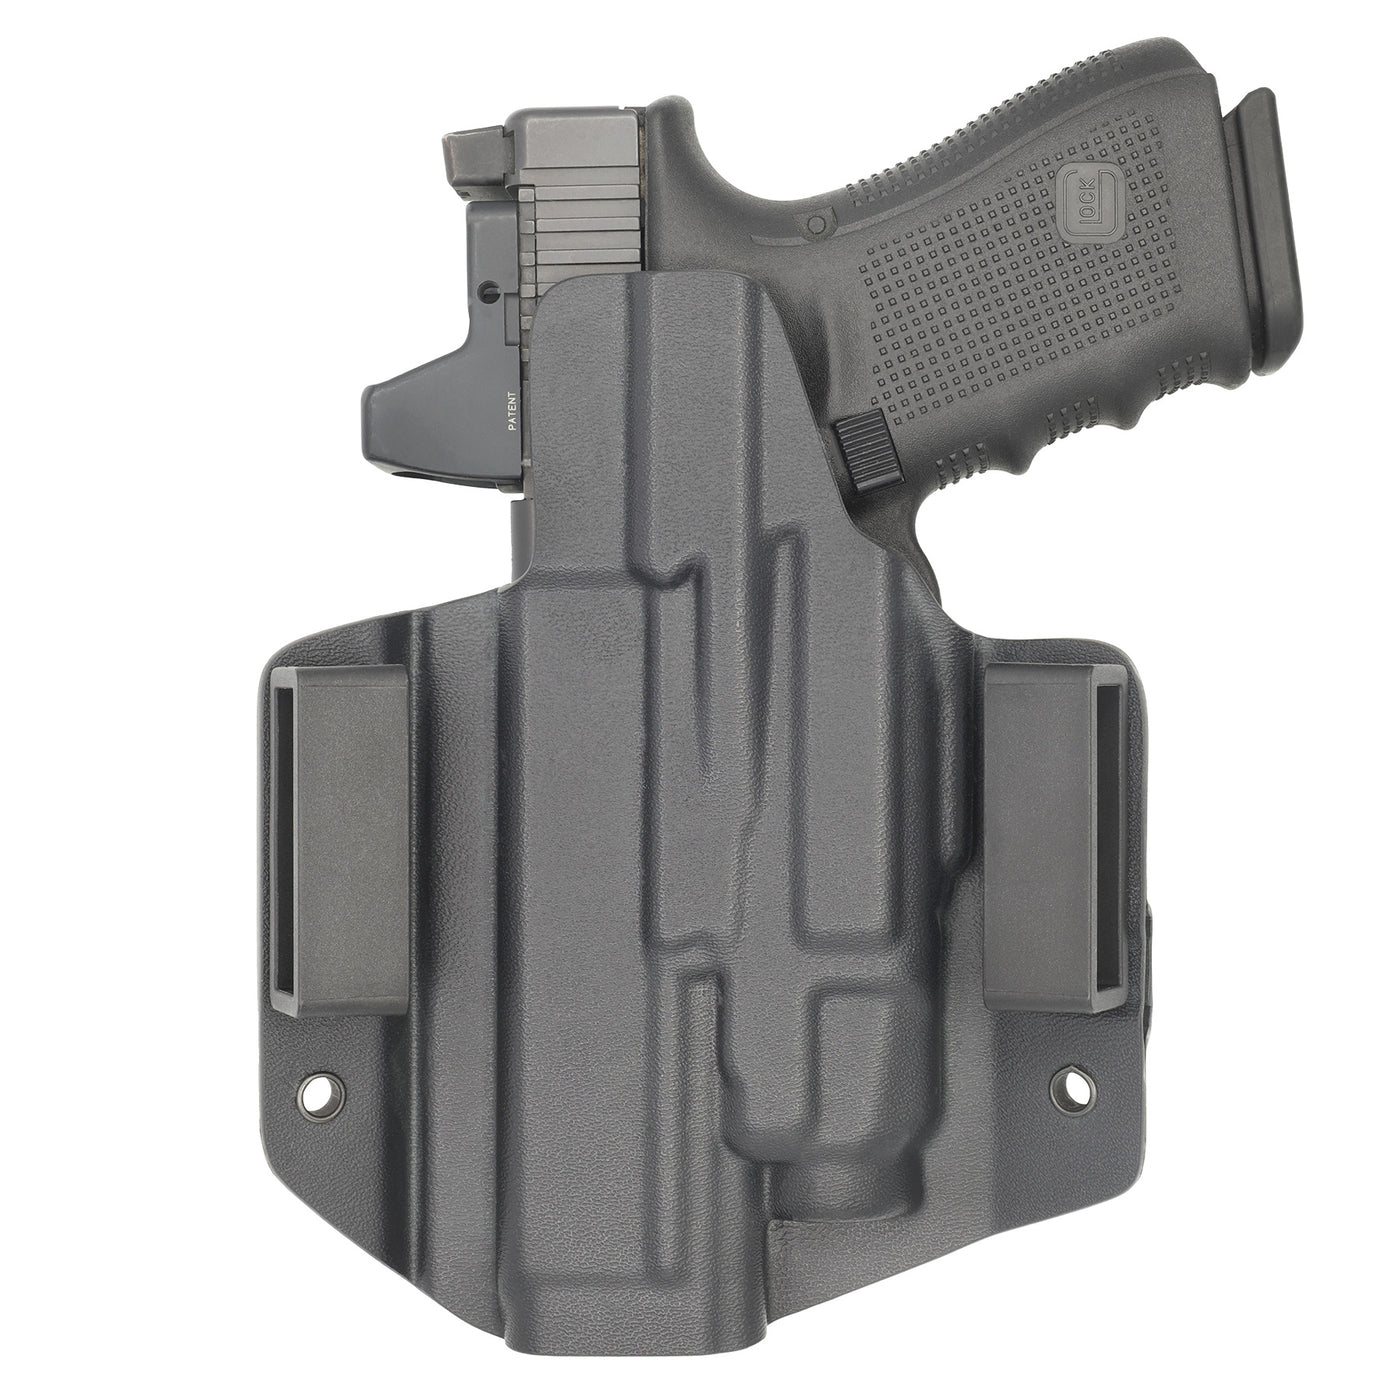 C&G Holsters custom OWB Tactical Shadow Systems Streamlight TLR7 holstered back view